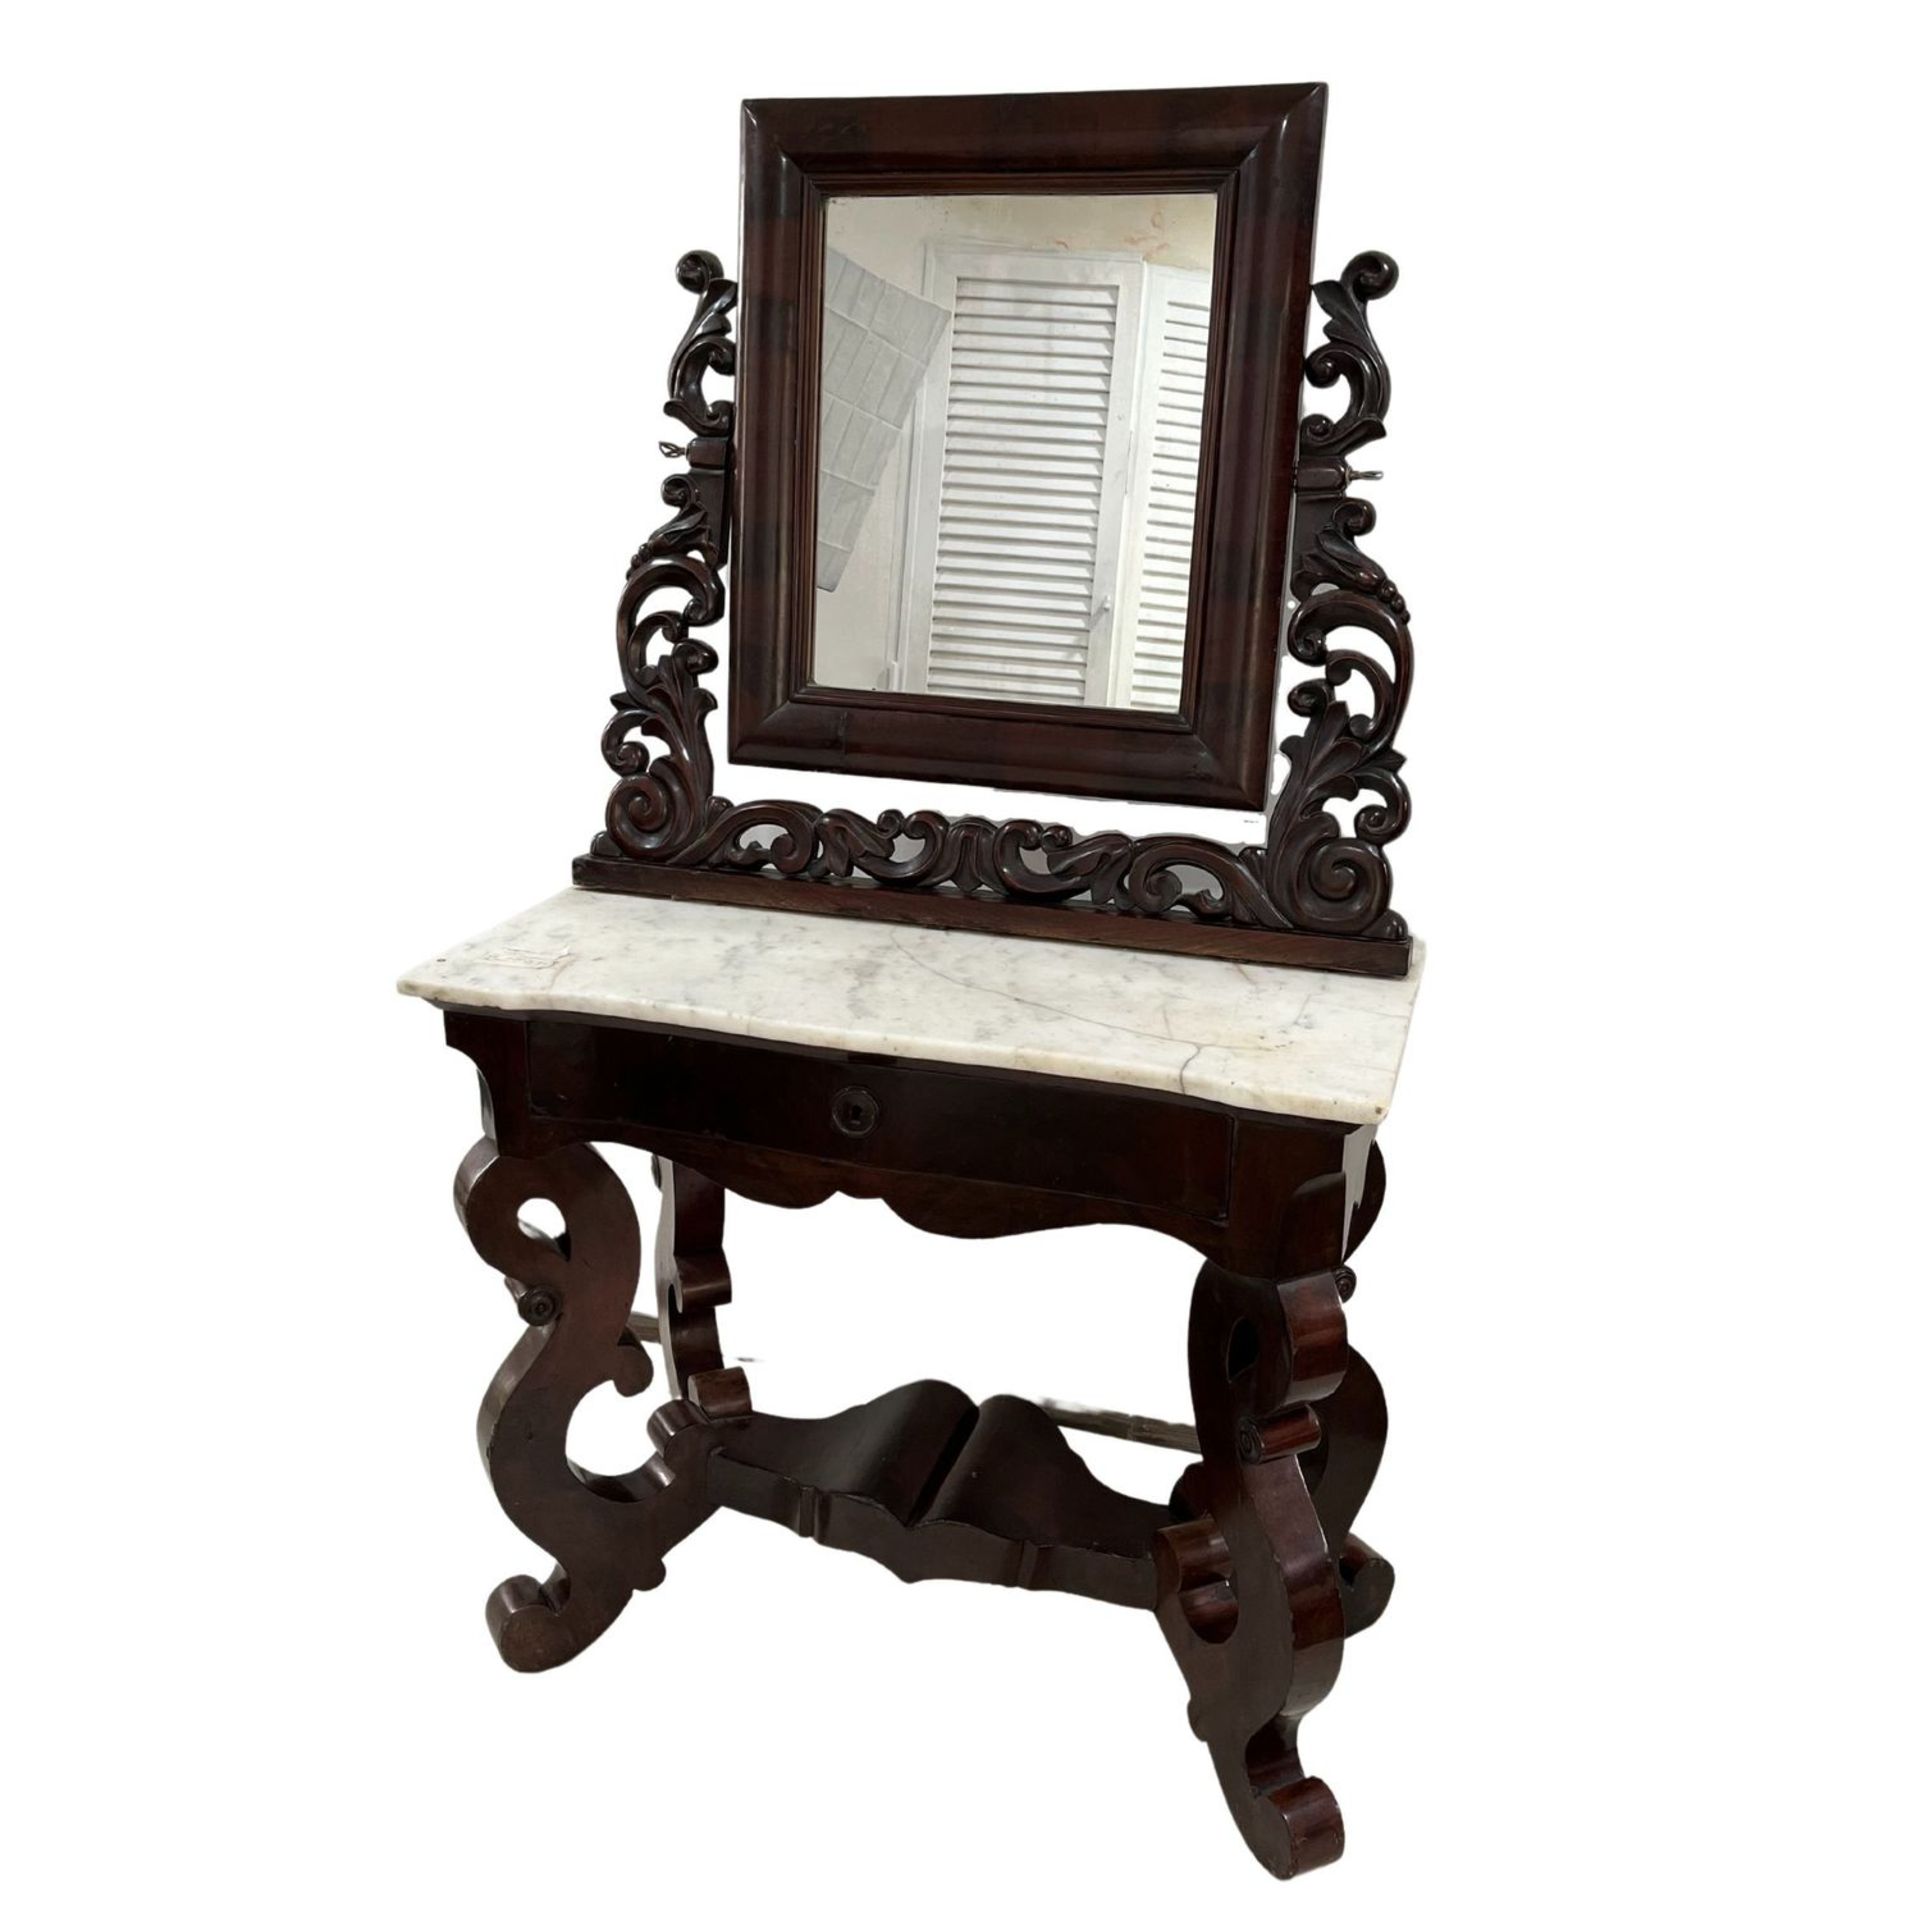 Dressing table with mirror - Toeletta - Image 4 of 6